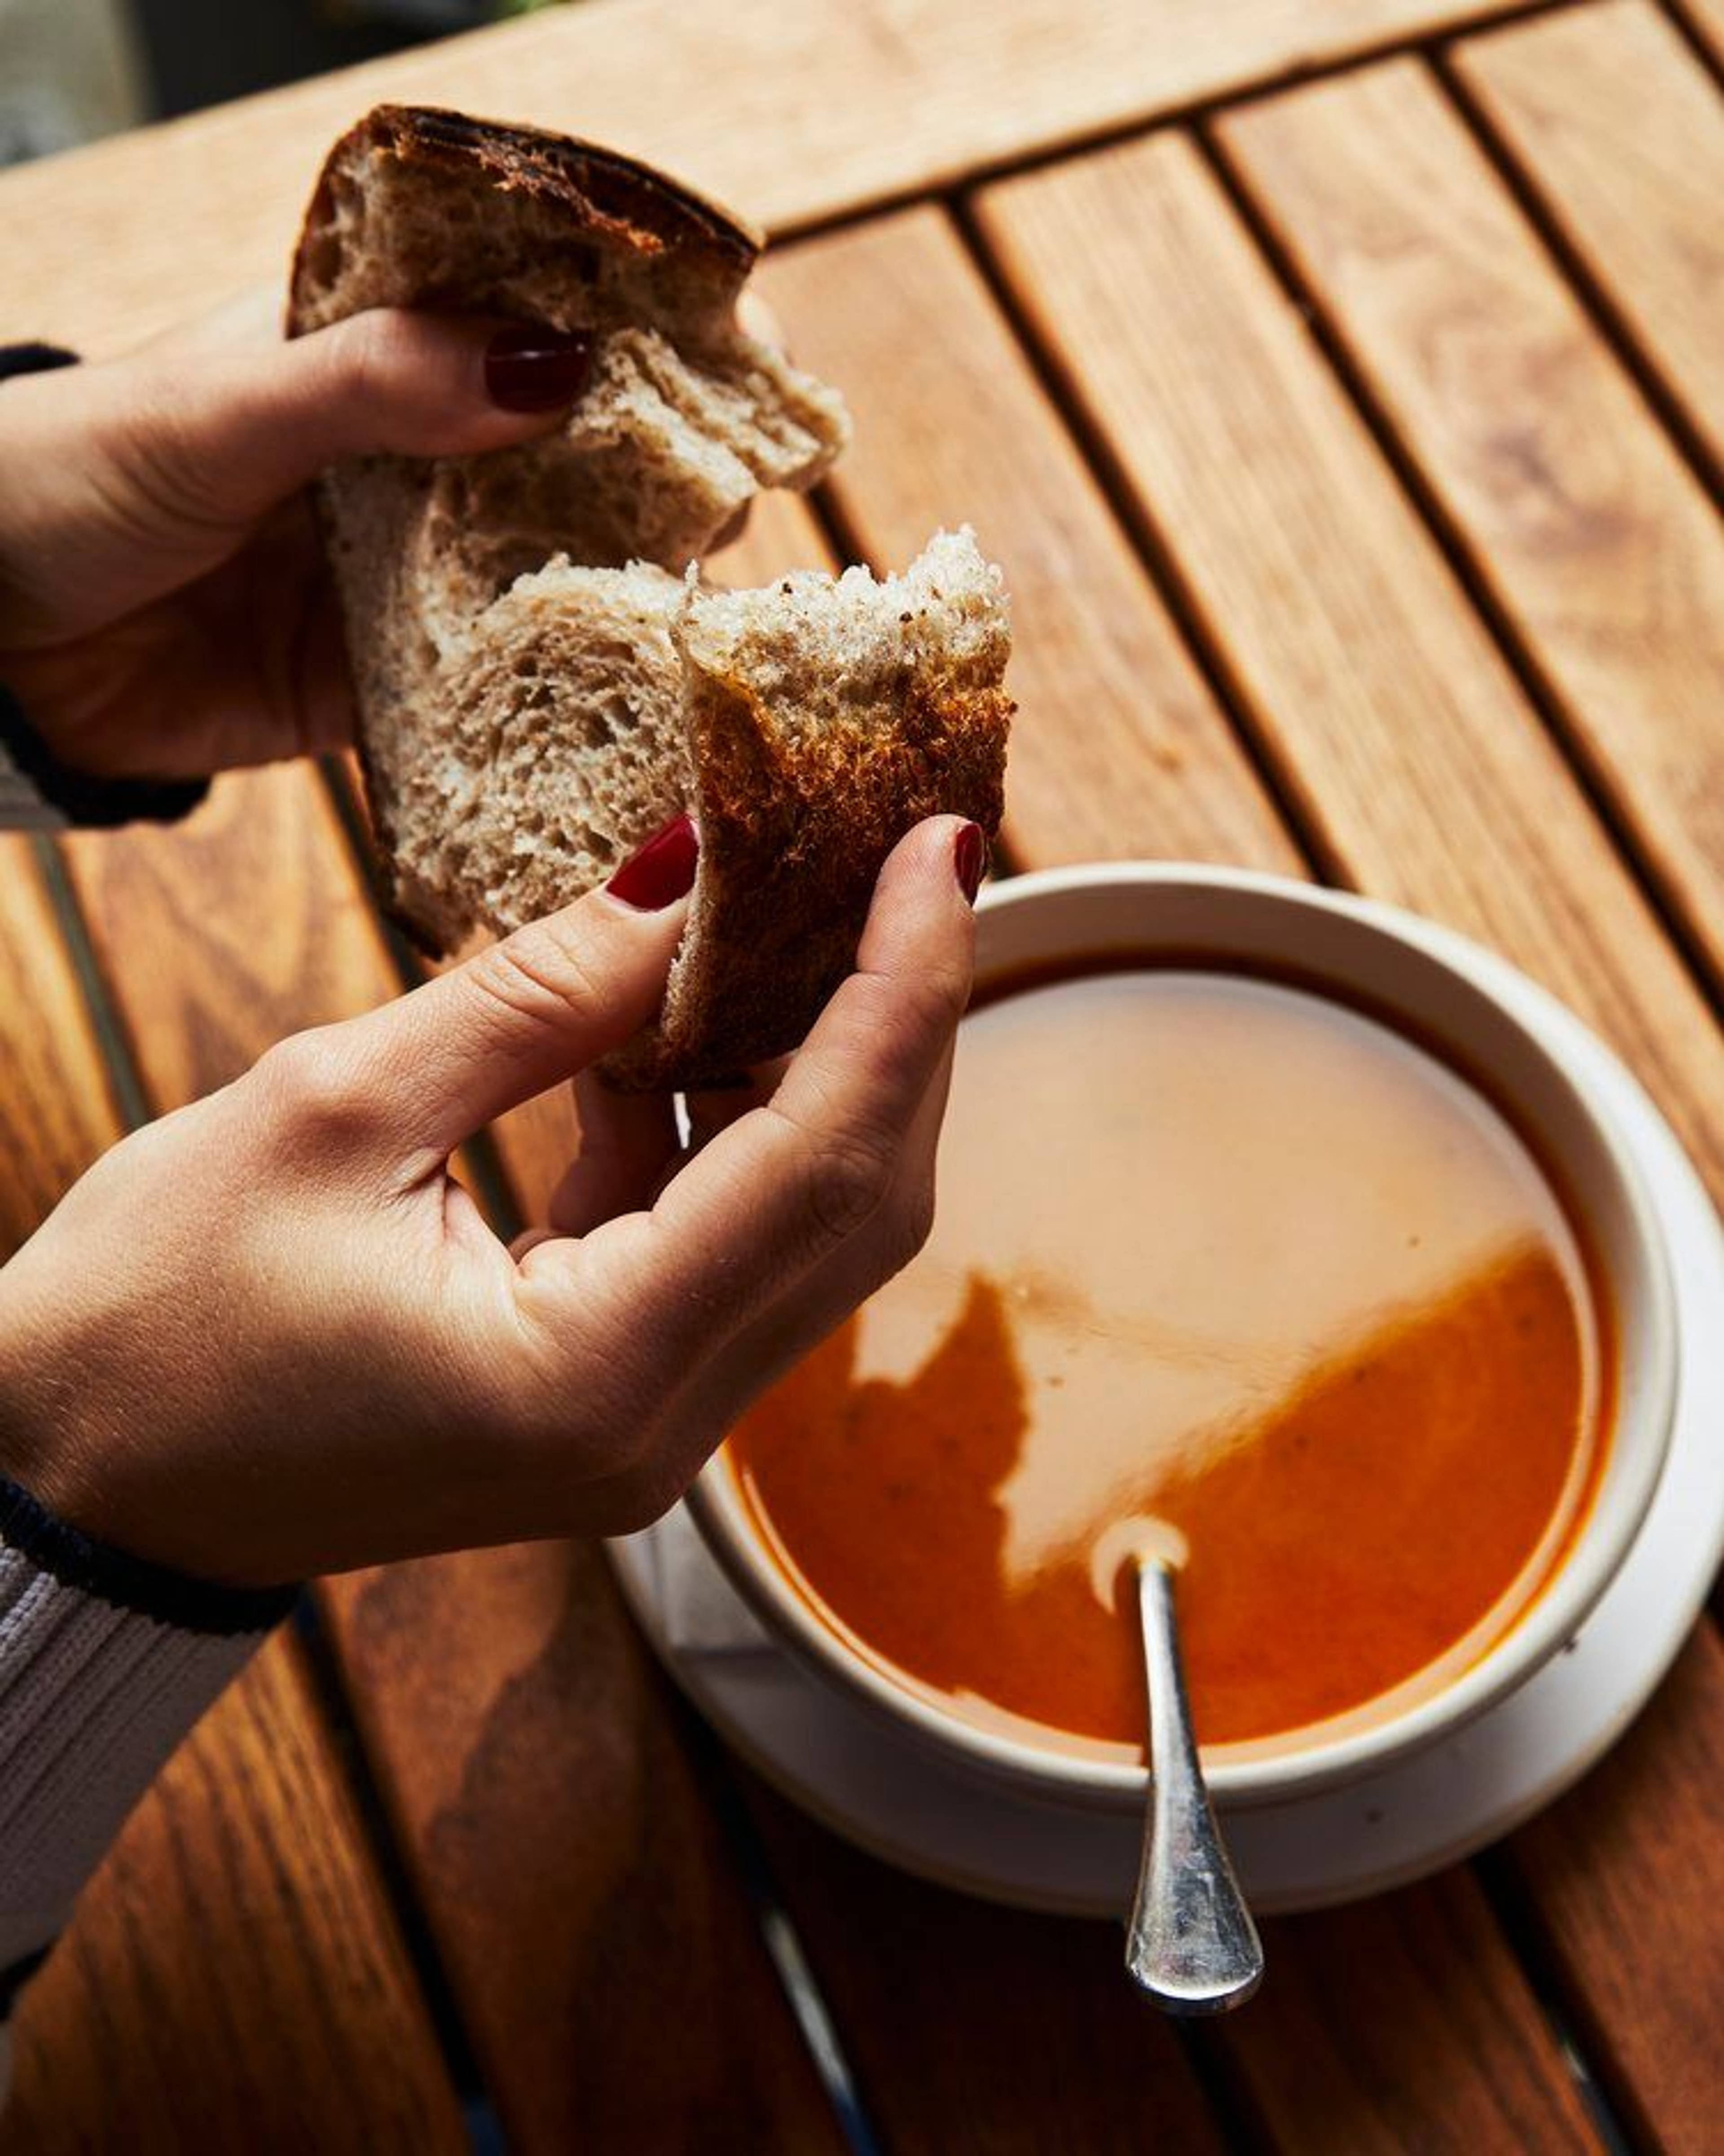 Tearing bread over delica soup